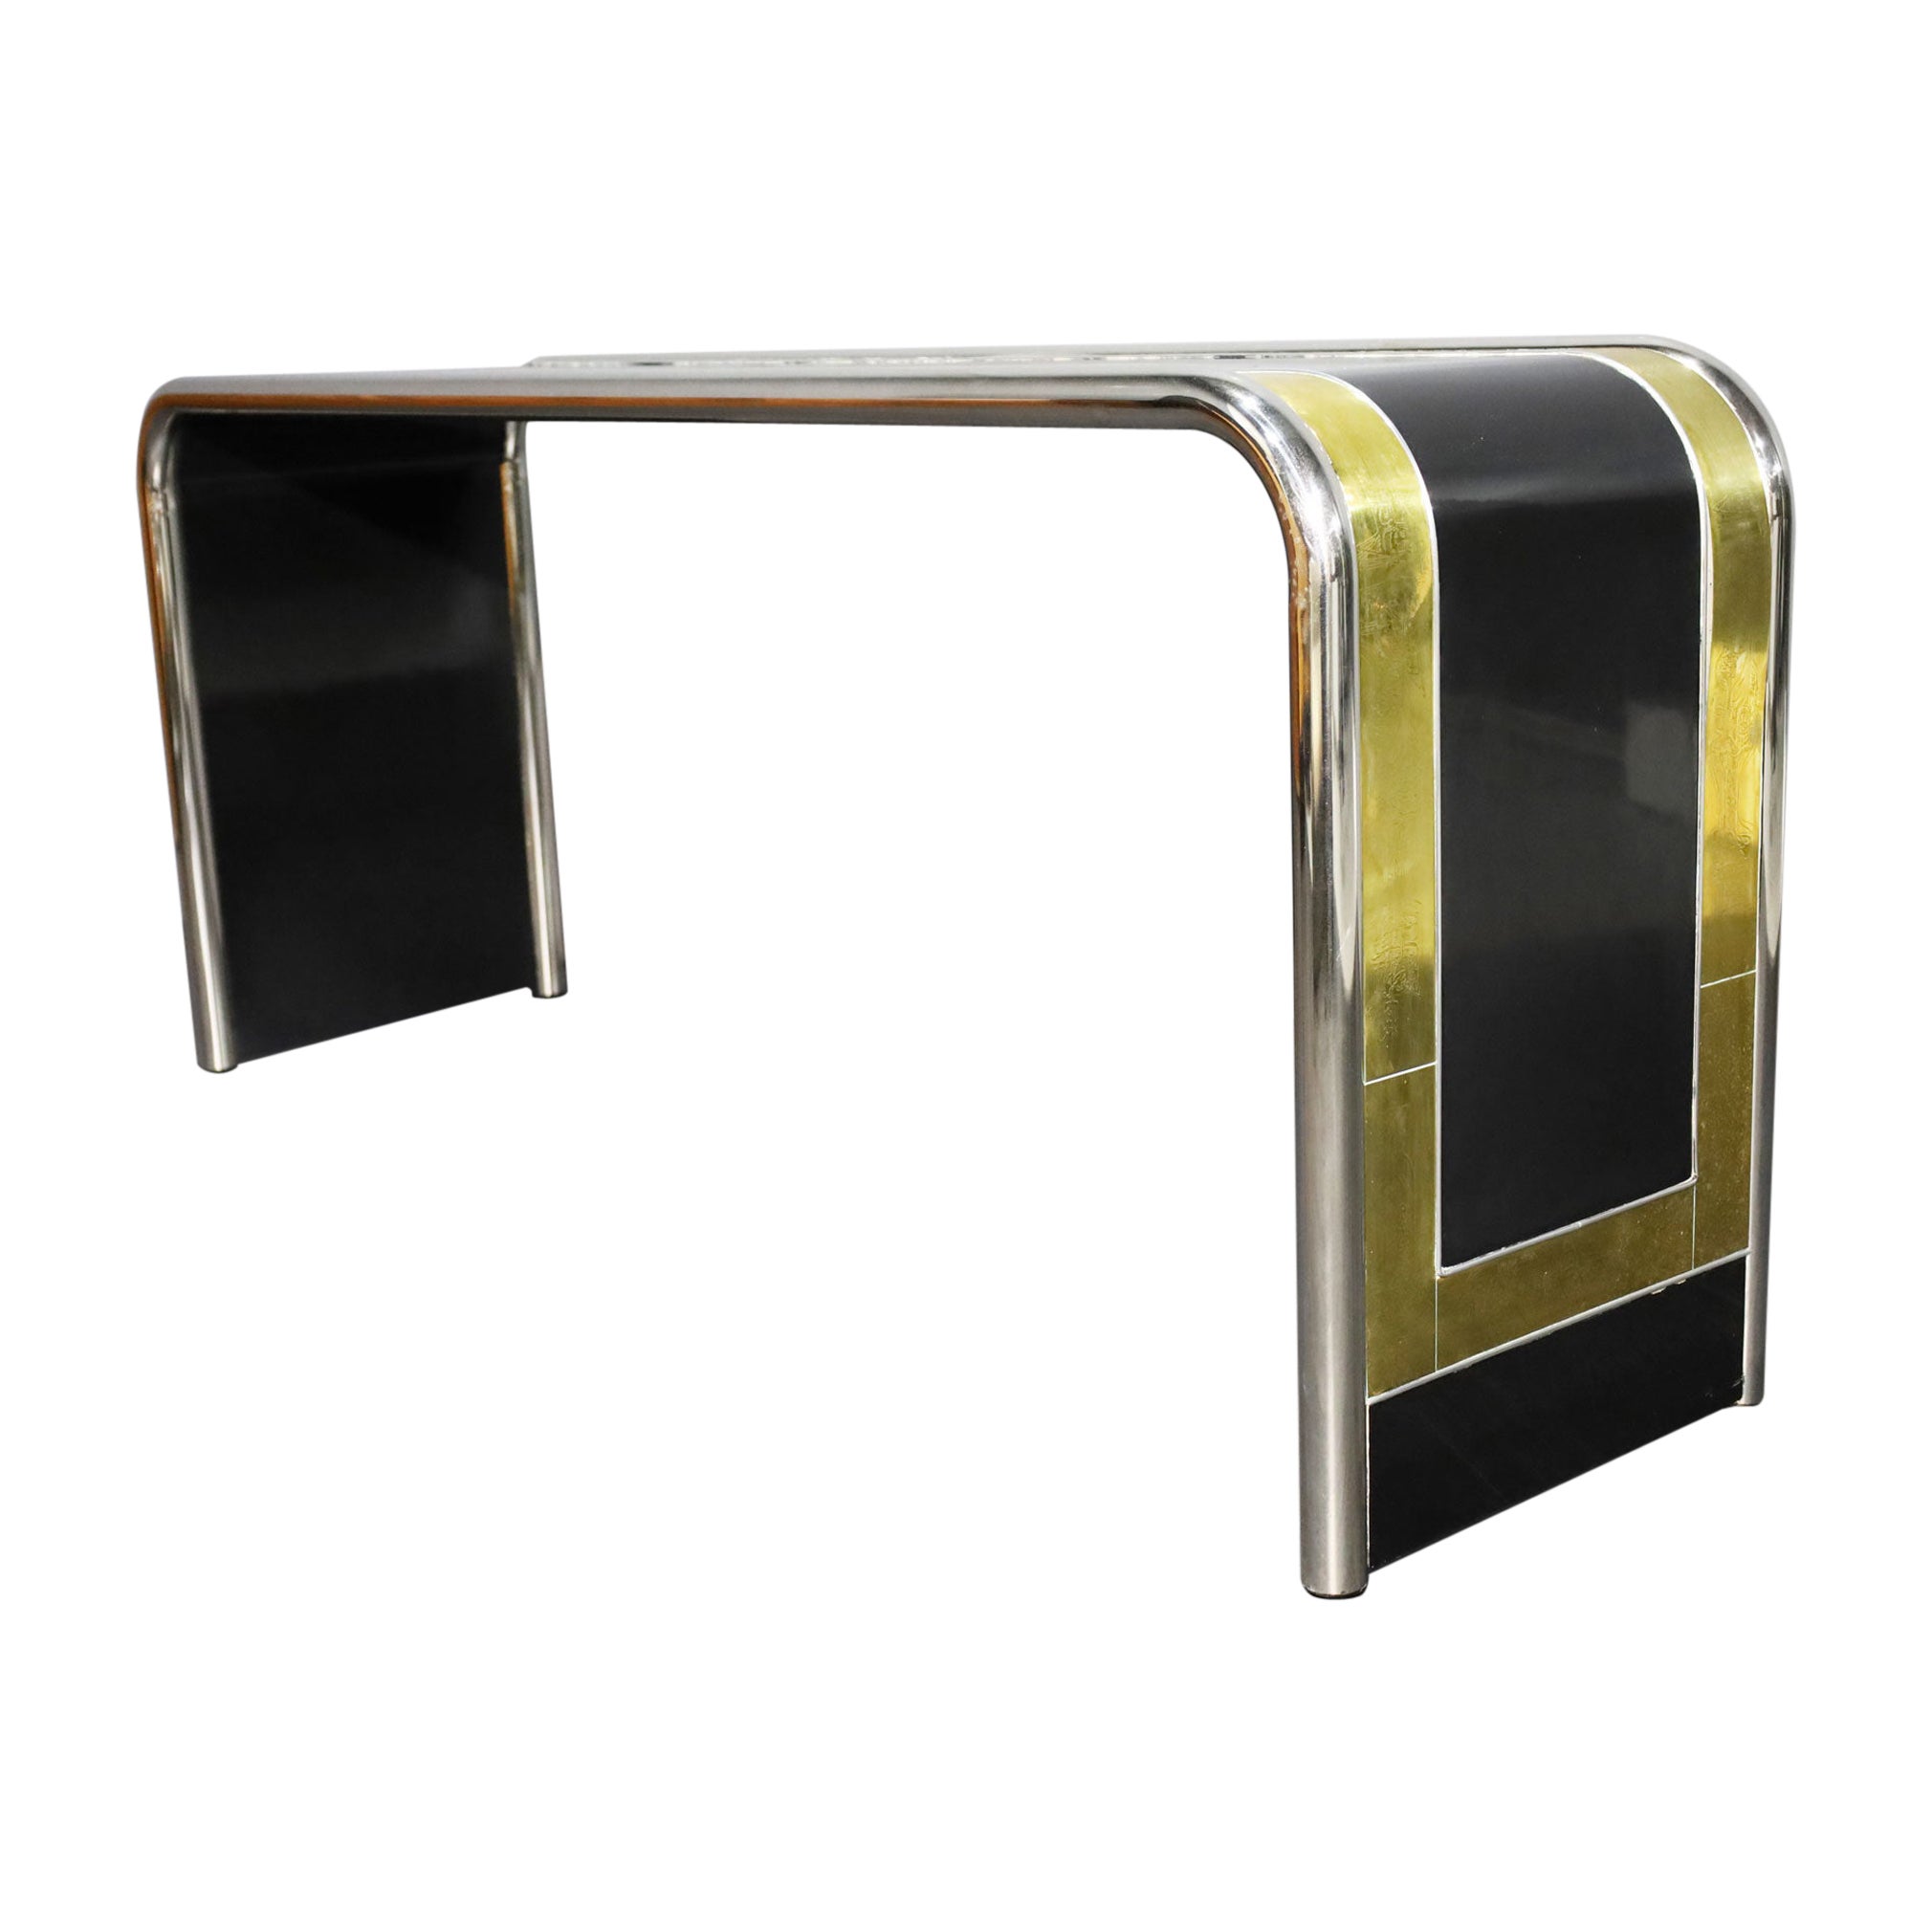 Bernhard Rohne for Mastercraft Lacquer, Brass and Chrome Console Table